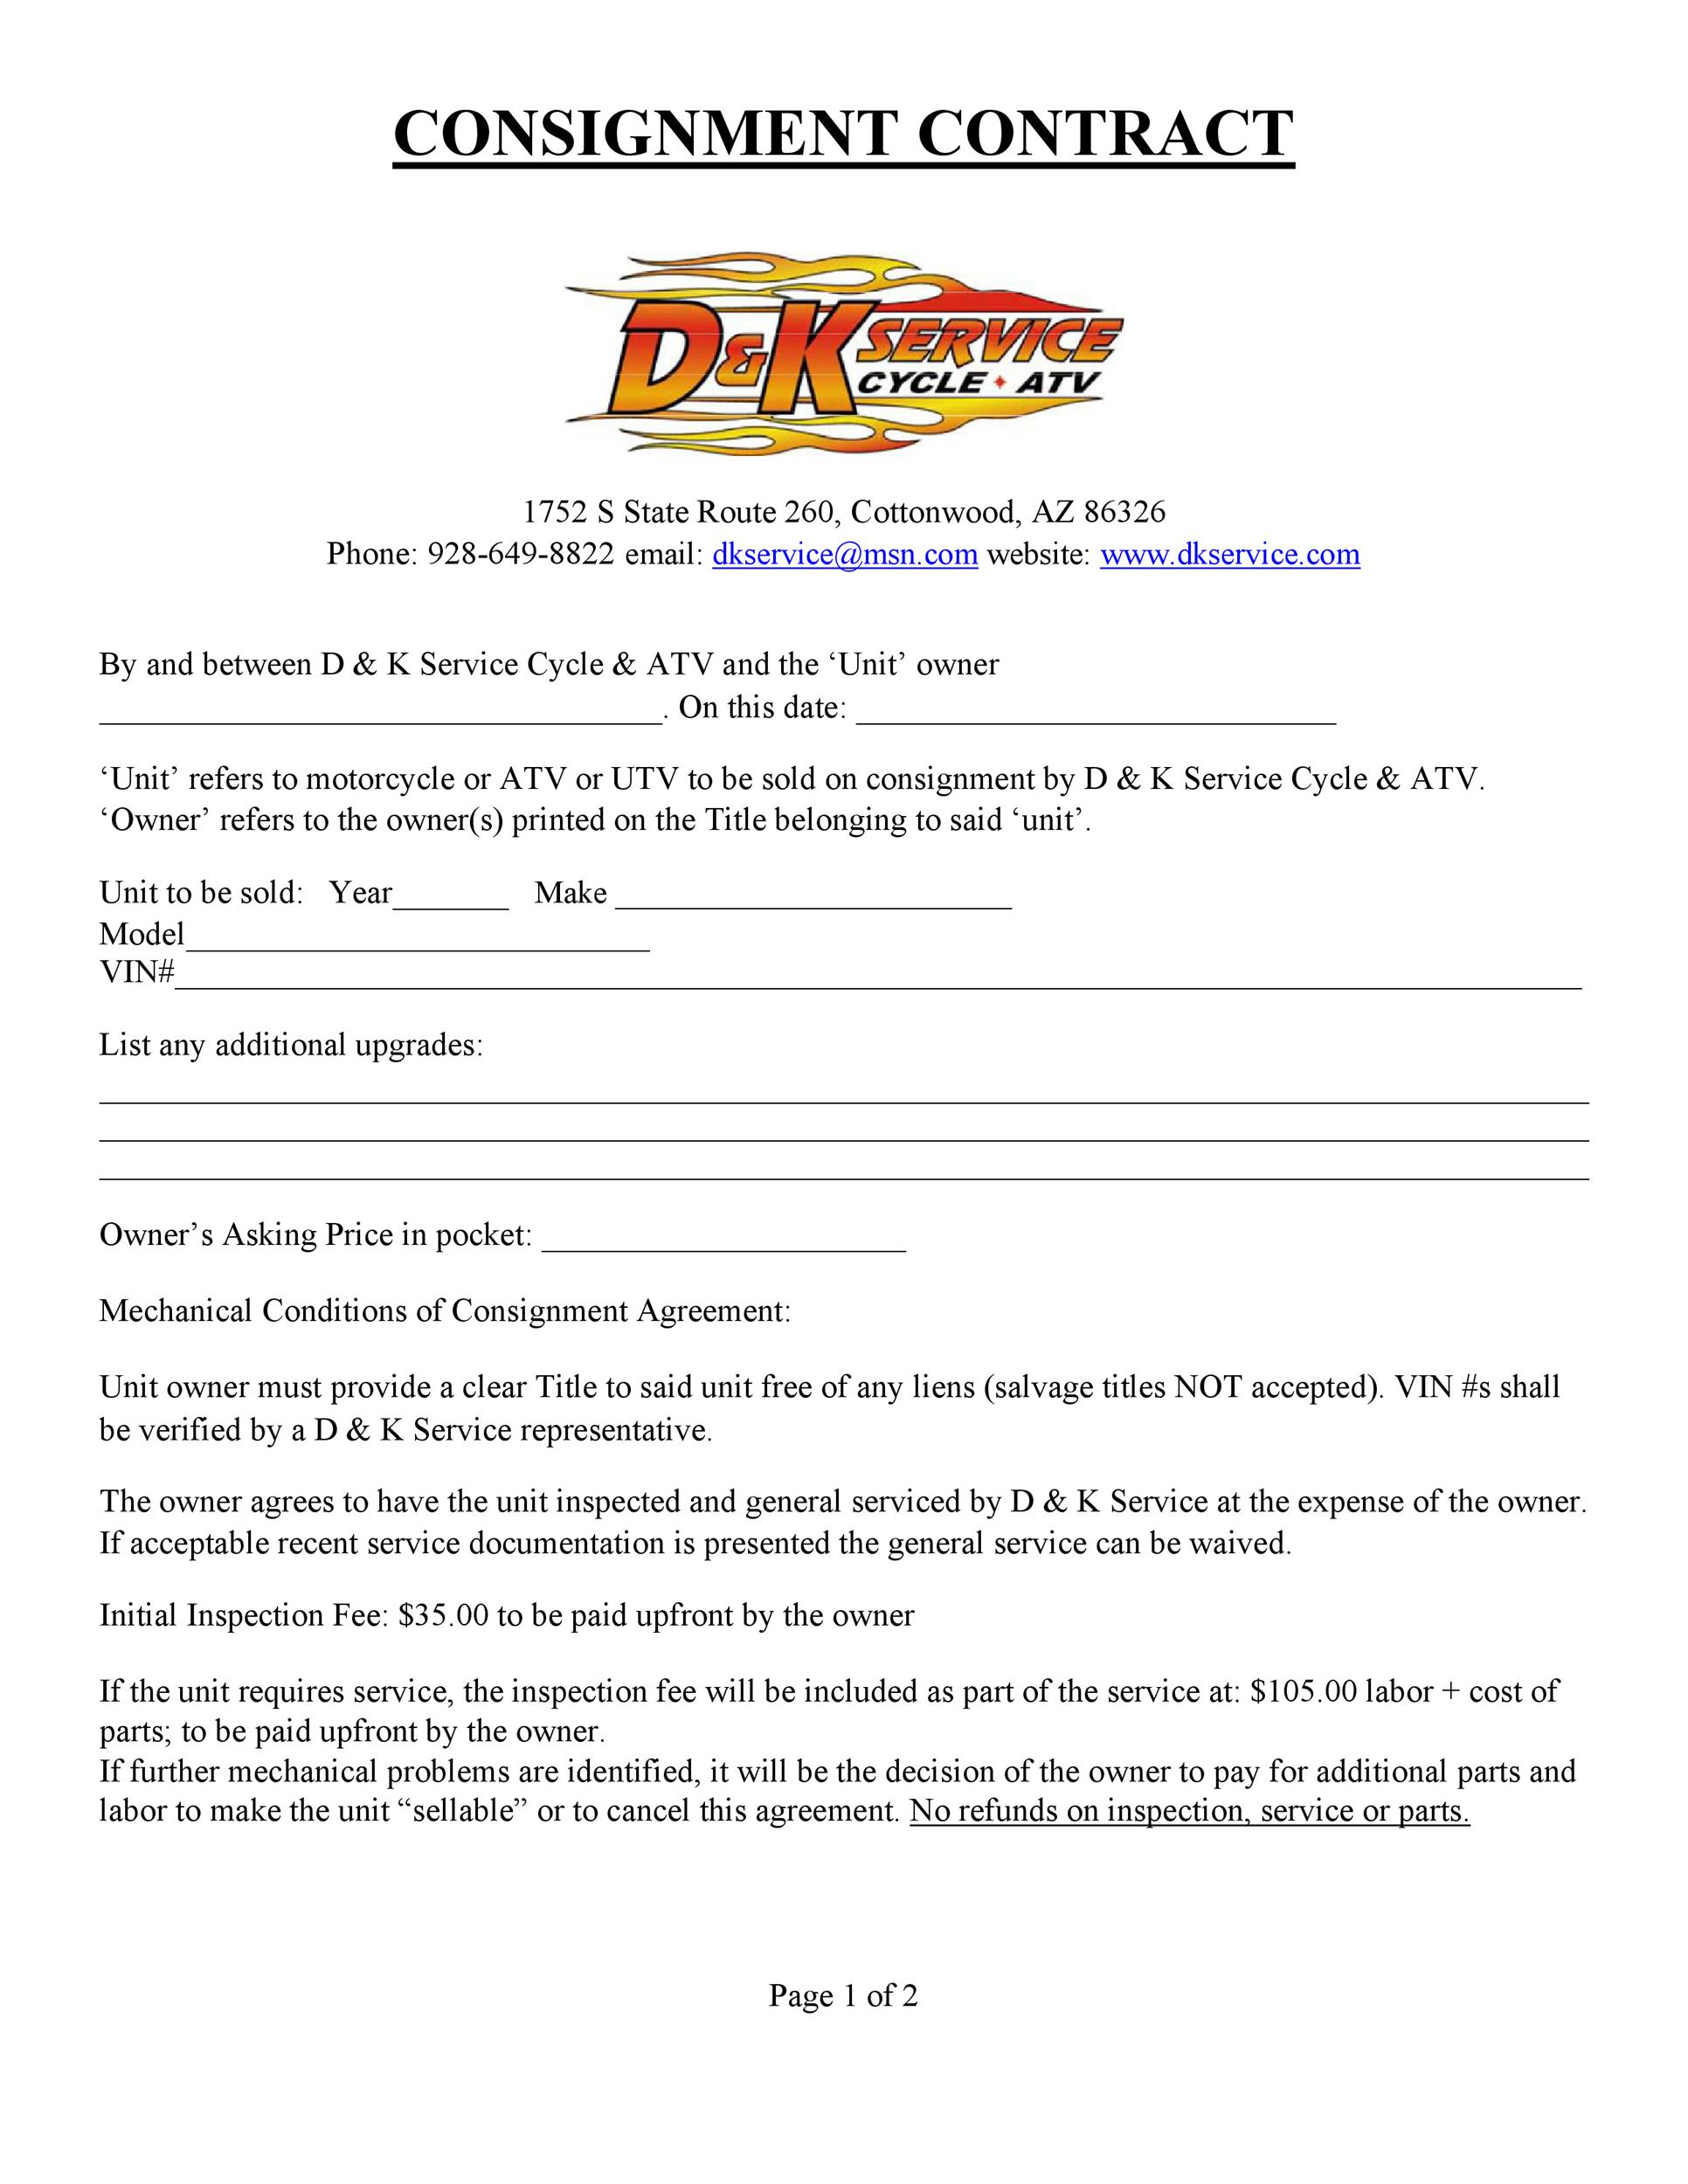 Free Consignment Agreement Template 33